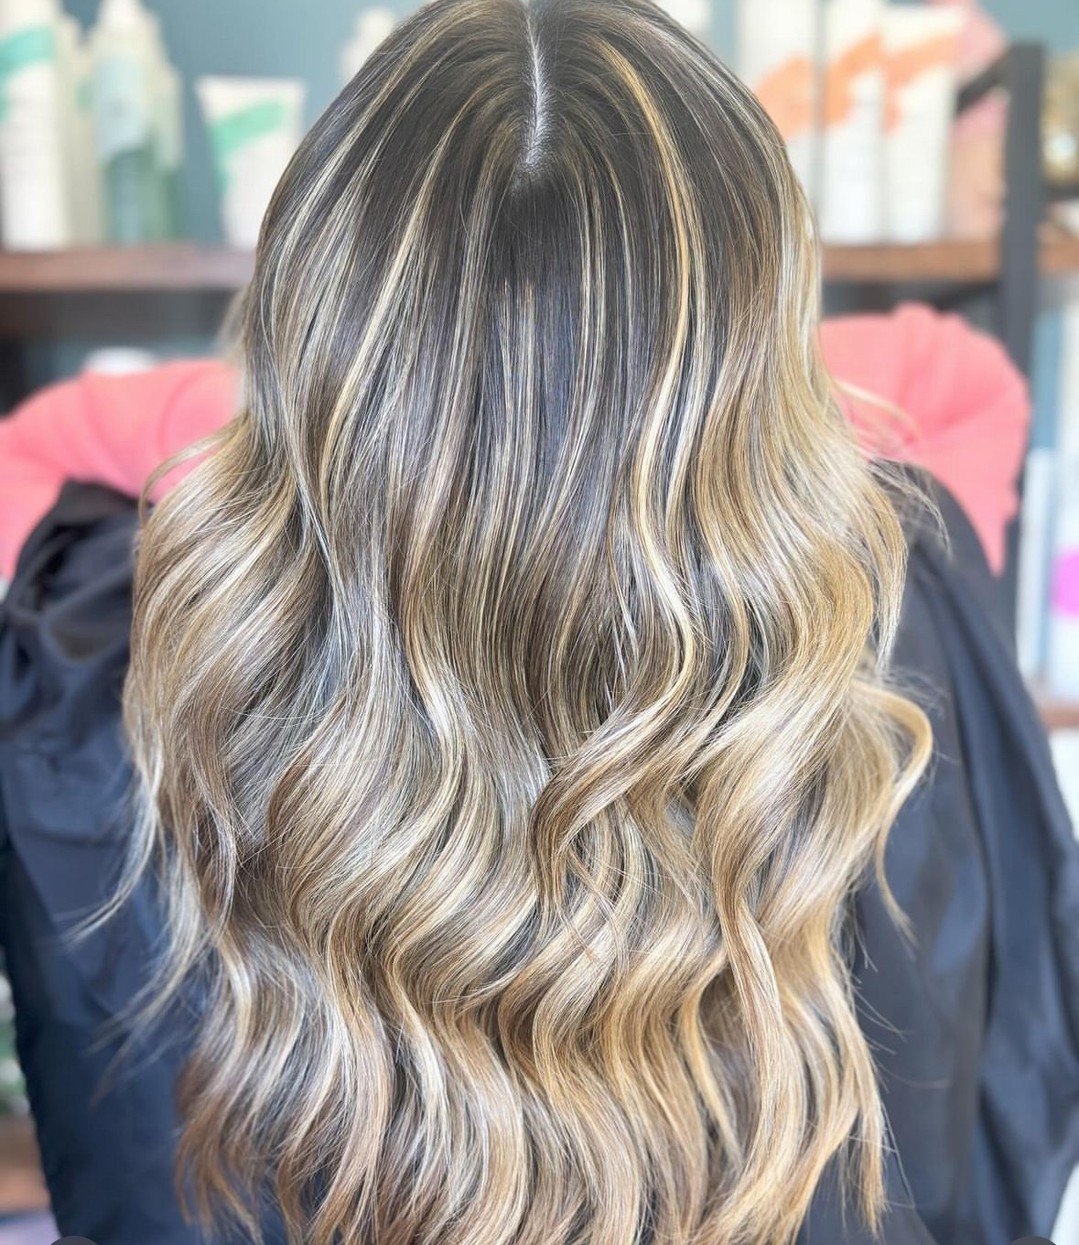 We see summer blonde in your future. 😍

But now is the time to start! Going bright and blonde is a process that usually takes multiple sessions.

This is because we want to keep your hair as strong and healthy as possible during the lightening proce